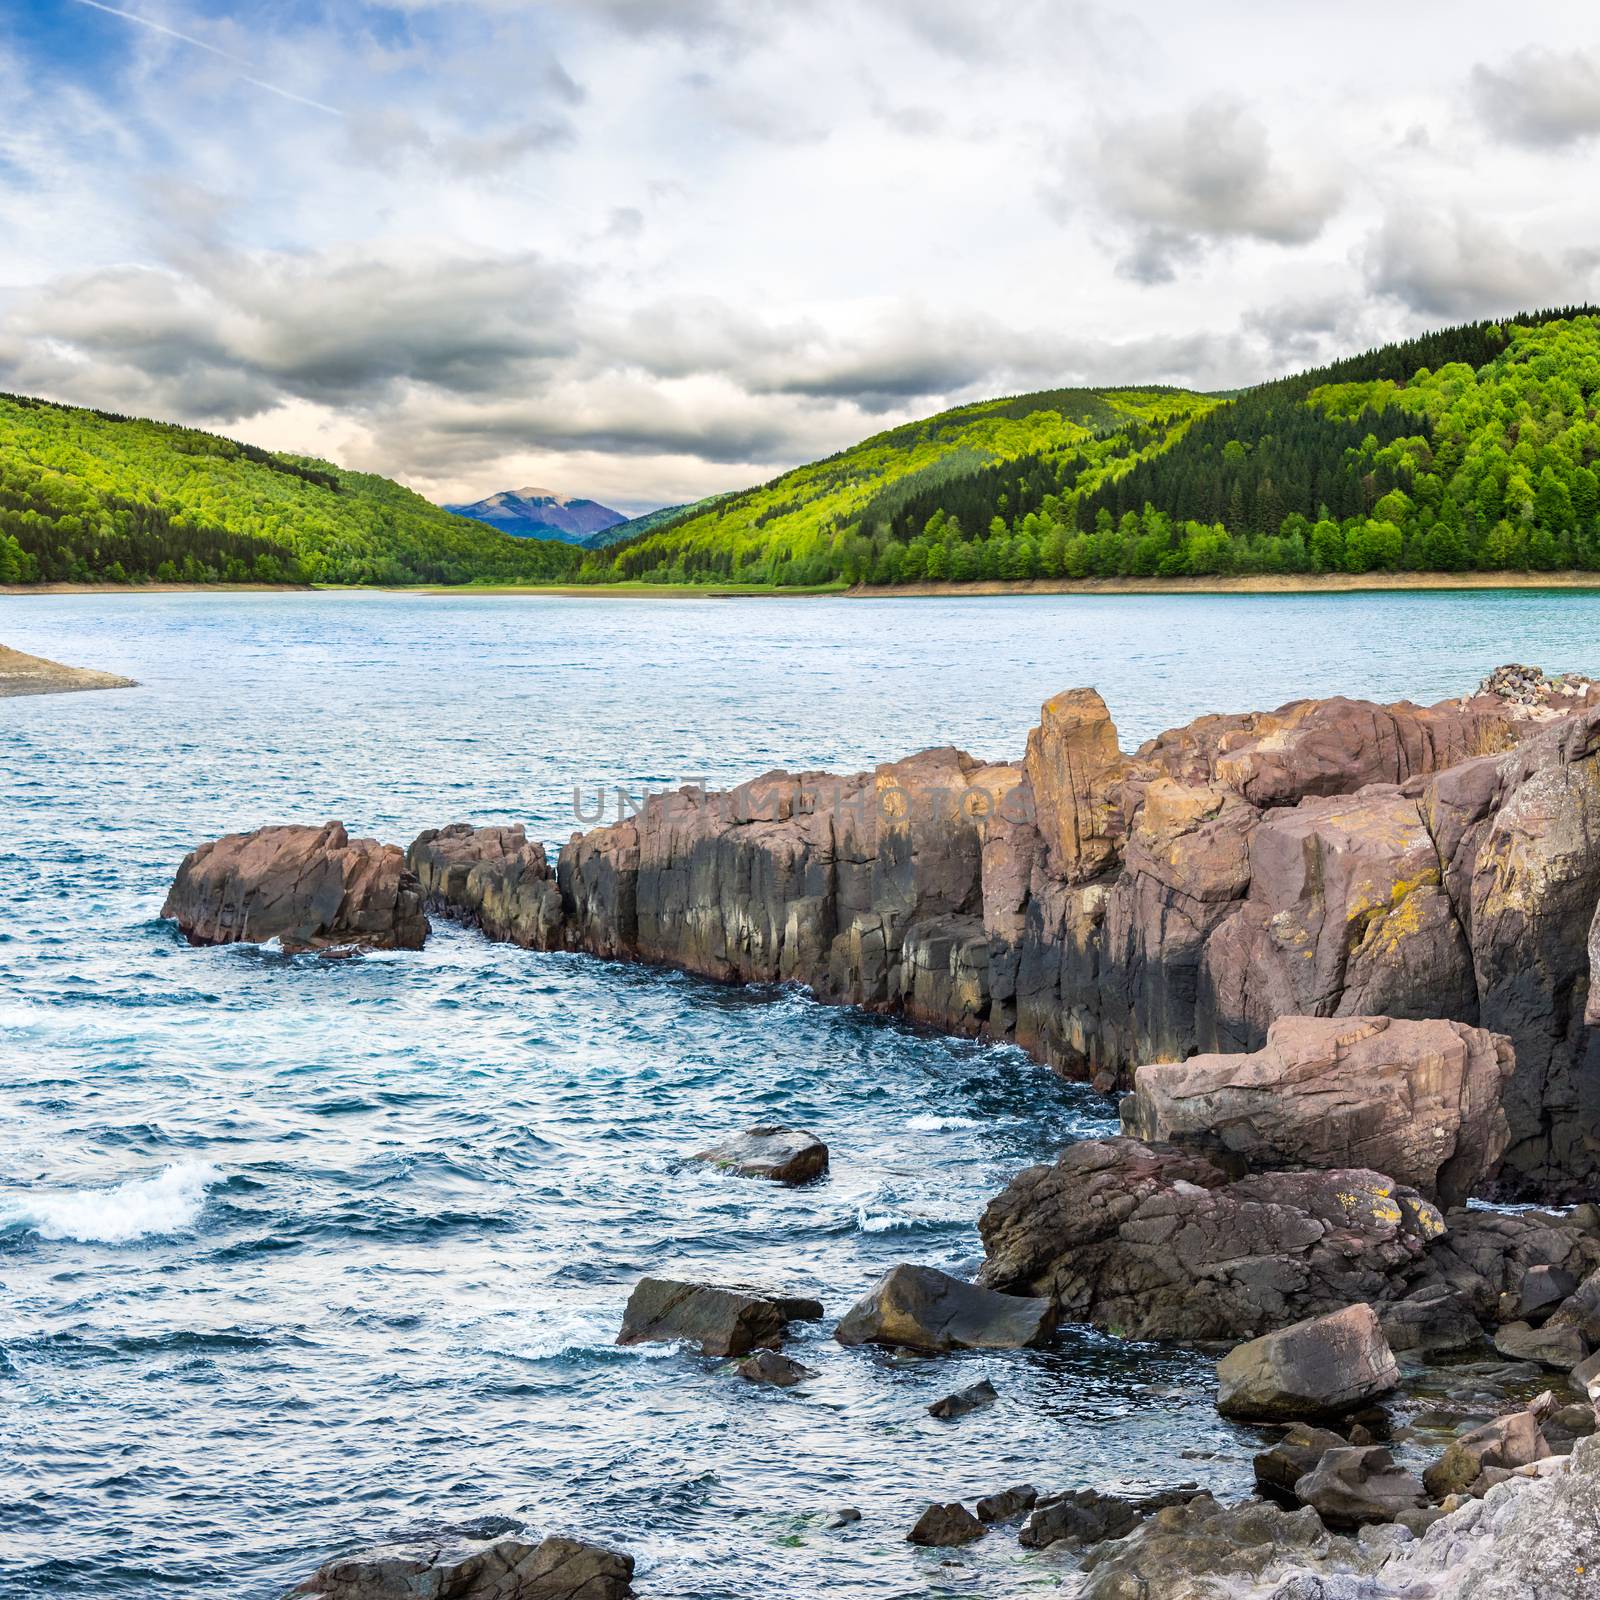 composite image of summer landscape  on lake with rocky shore and some boulders near forest in mountain  with high peak far away in morning light